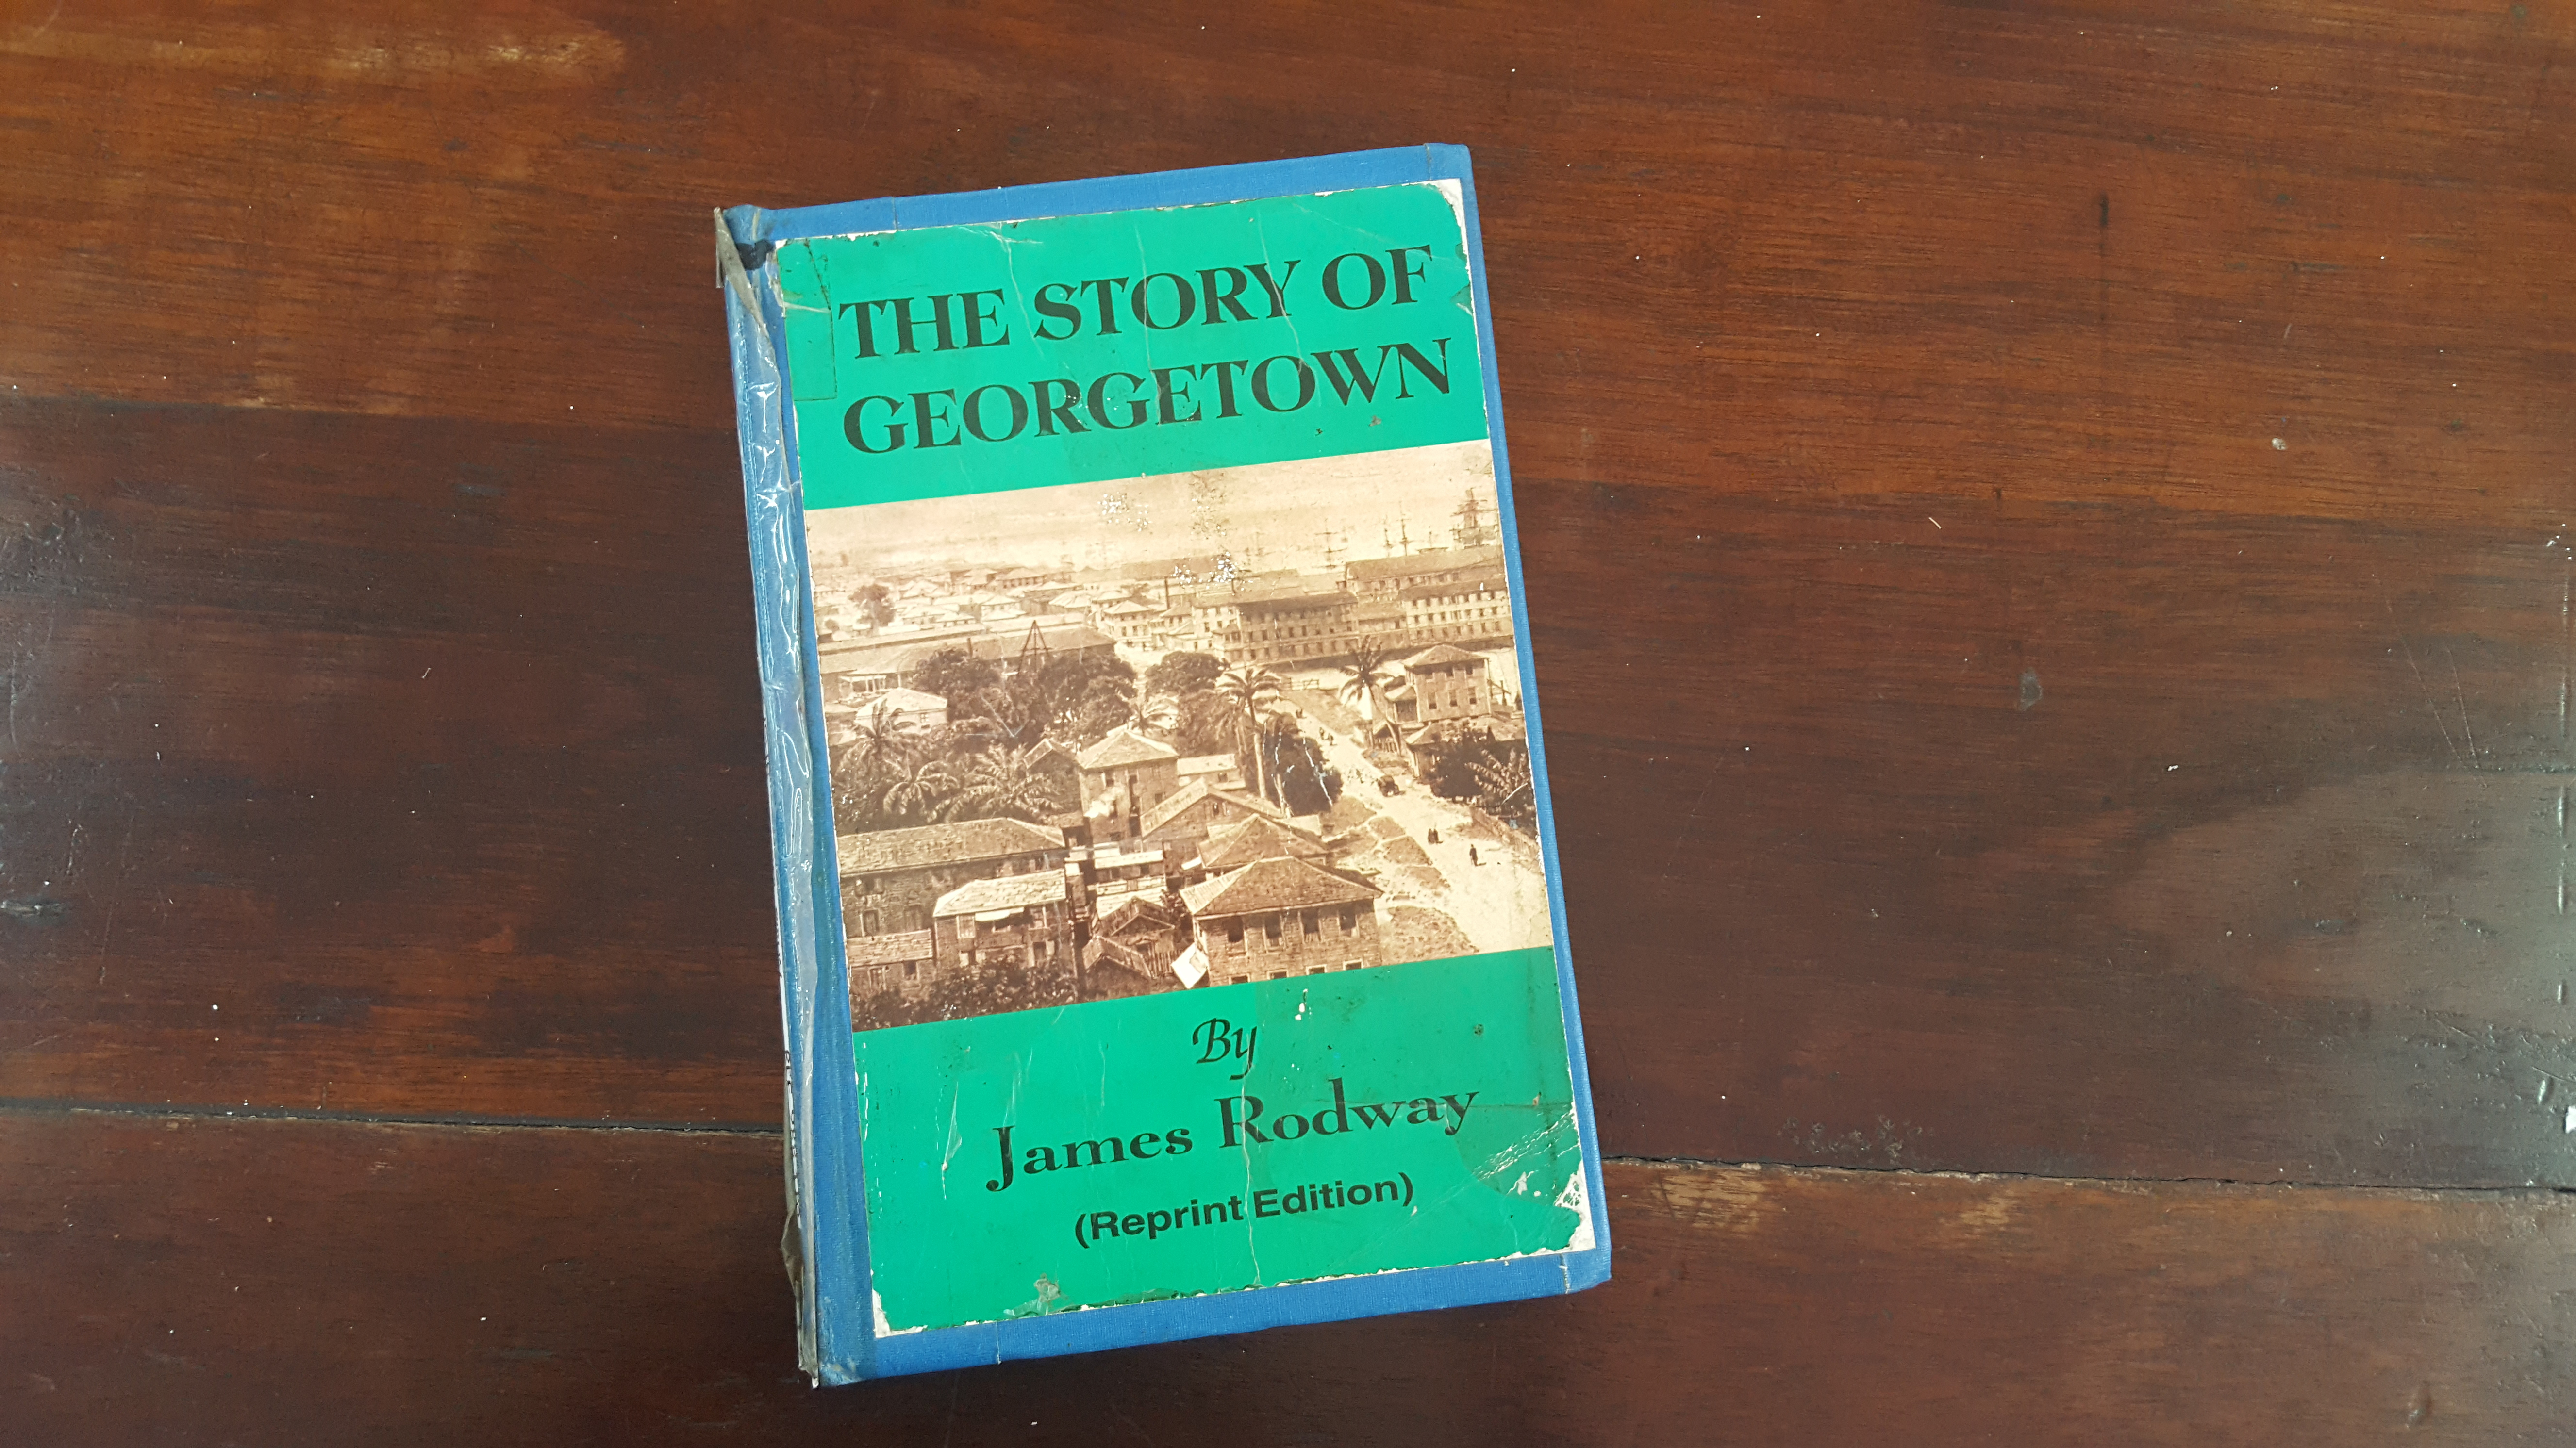 terrain_cover of James Rodway's book The Story of Georgetown - image credit Carinya Sharples